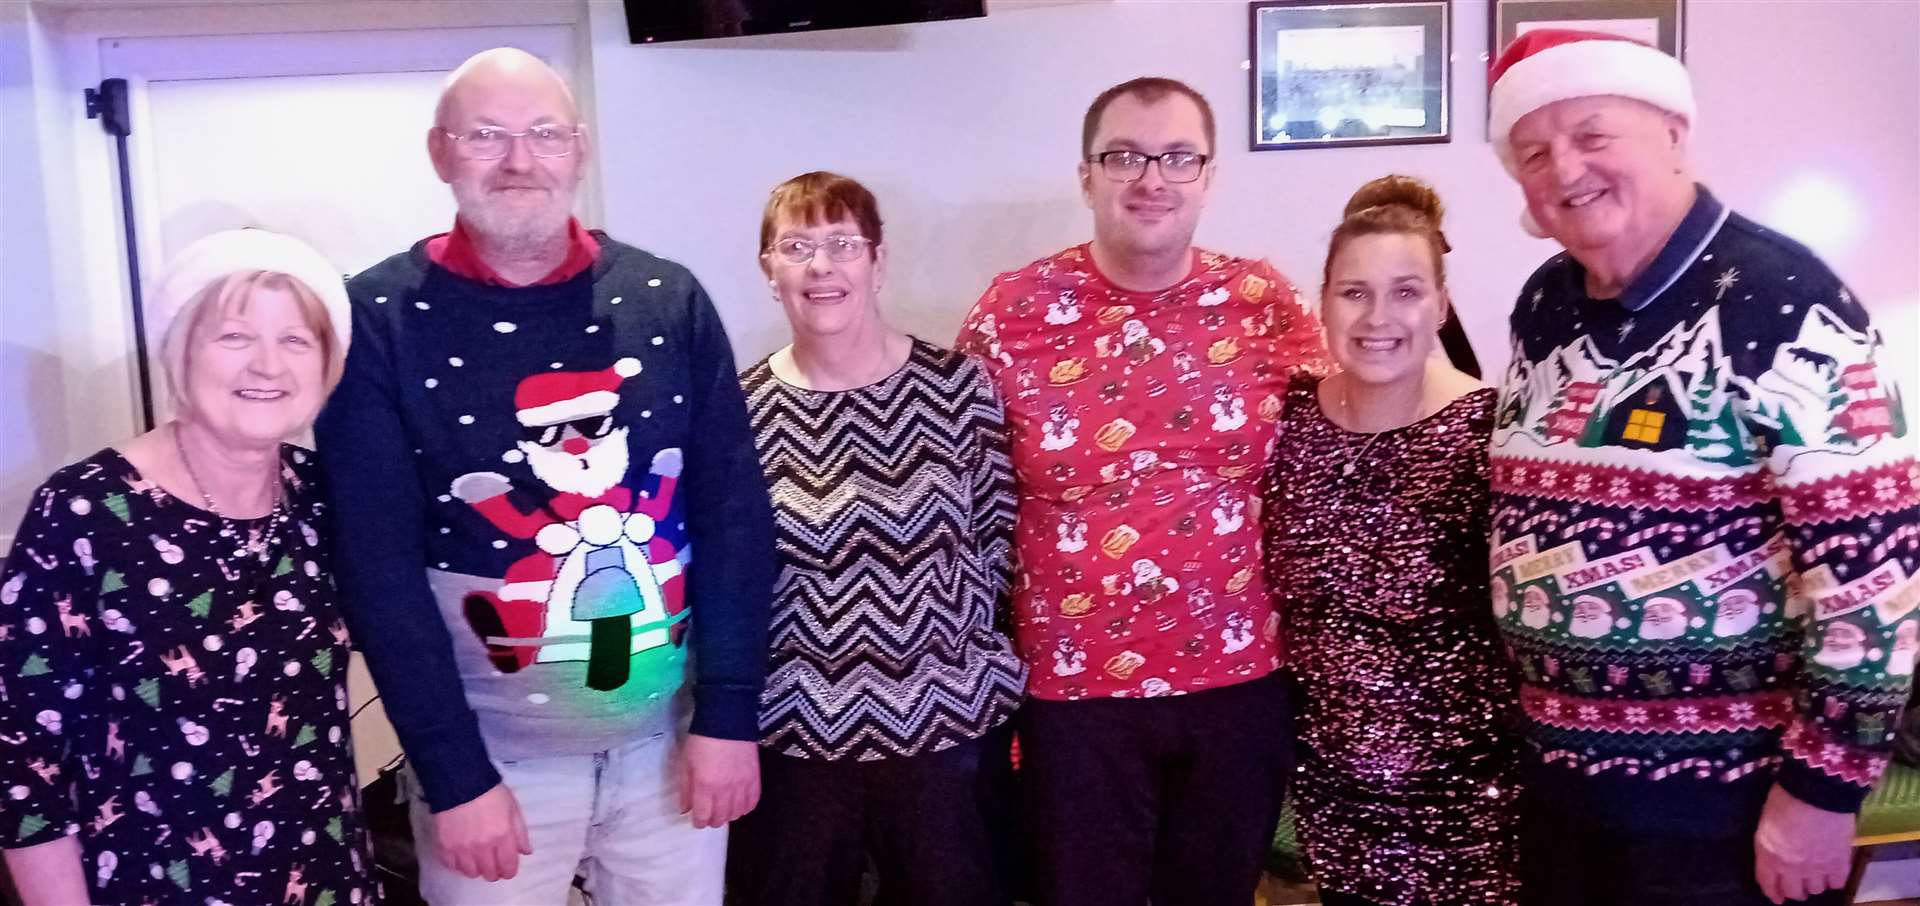 In the festive party mood are (from left) Glynis Mackay, Shane Thomson, Catherine Mahon, Aaron Mahon, Aimee Marks and Willie Mackay. Picture: Willie Mackay